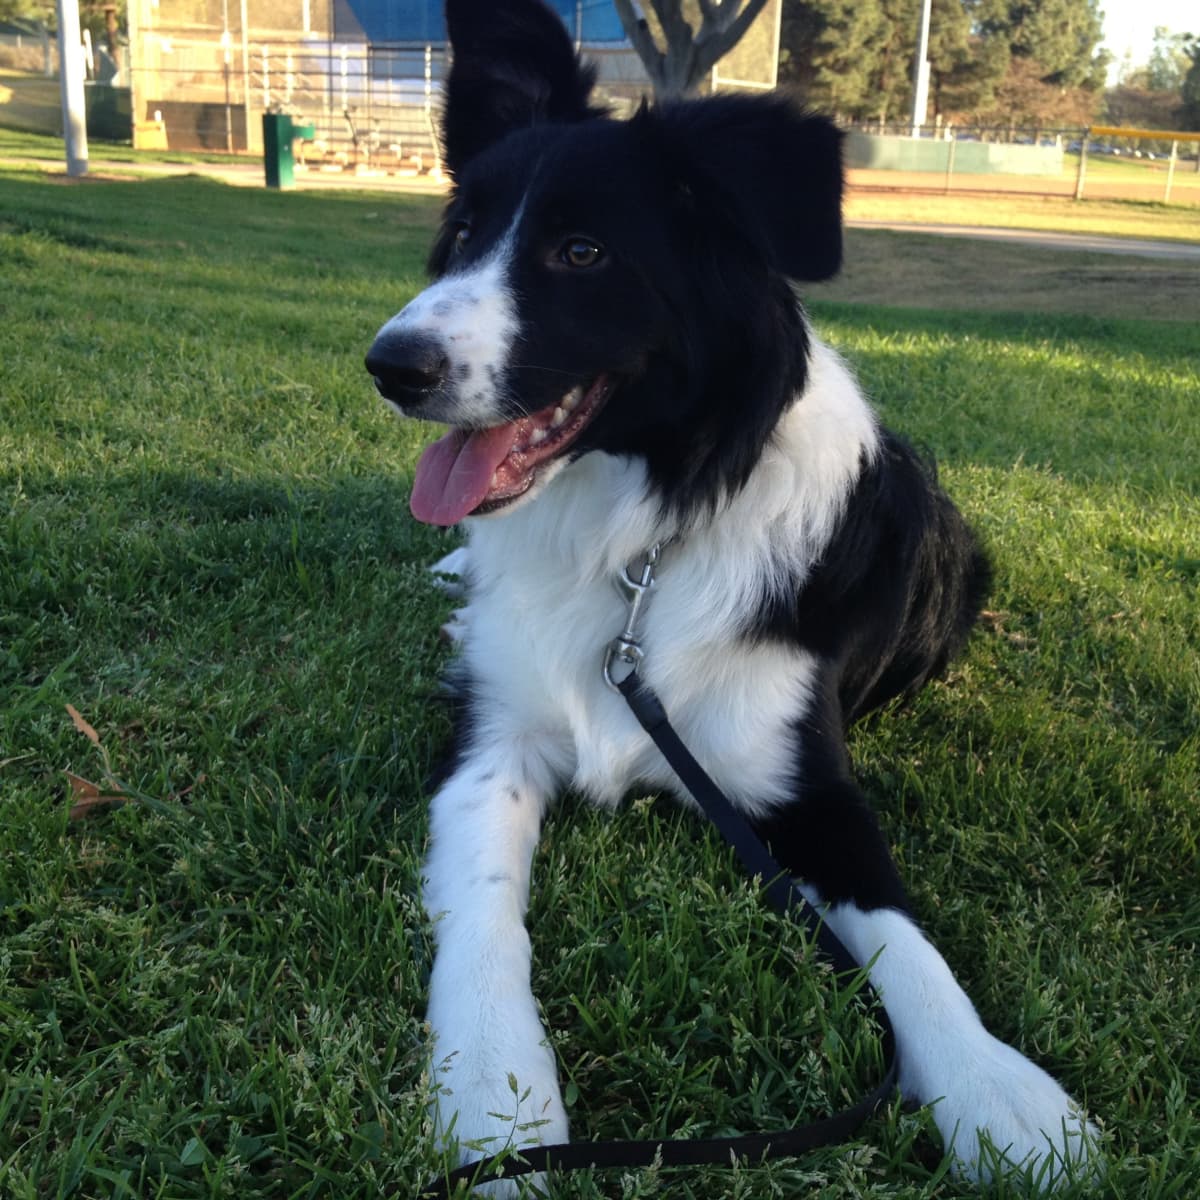 What to Do With Border Collie While at Work